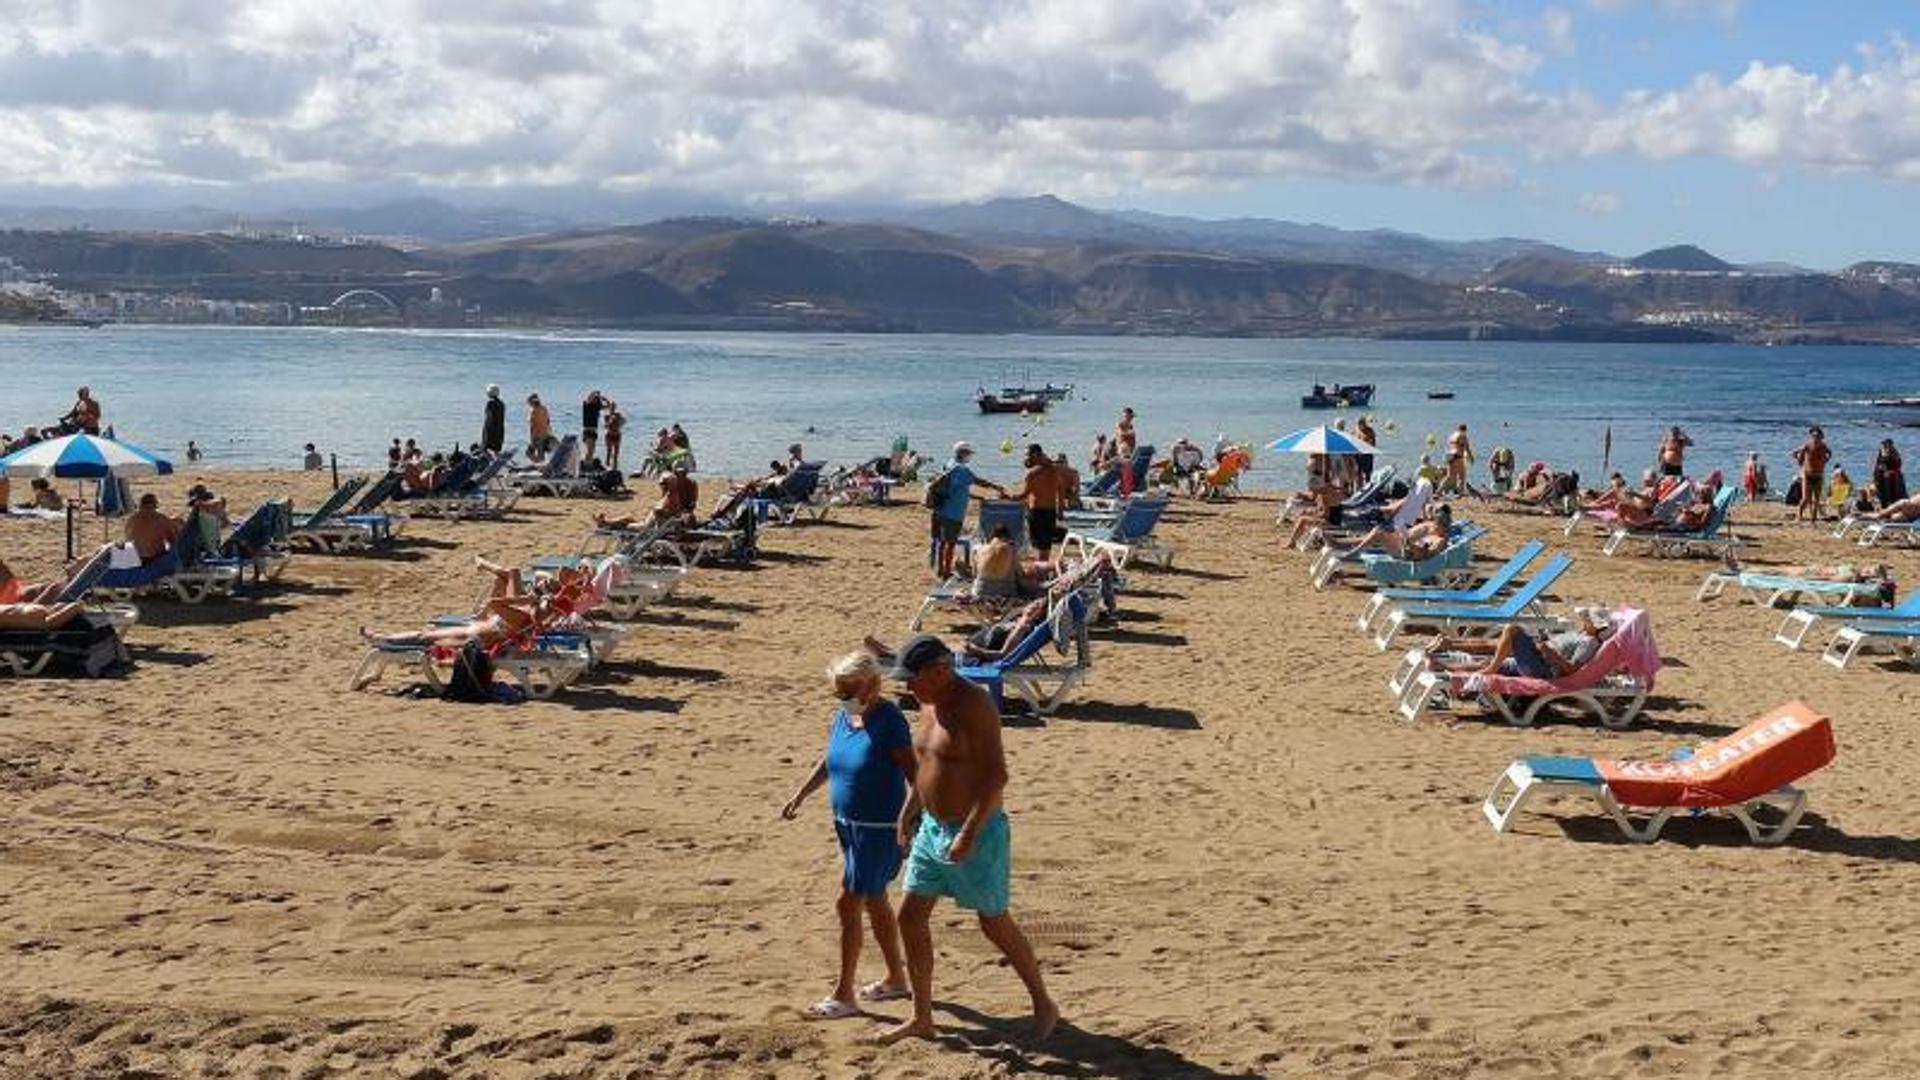 European tourists pay 25% more to come to Spain at Easter